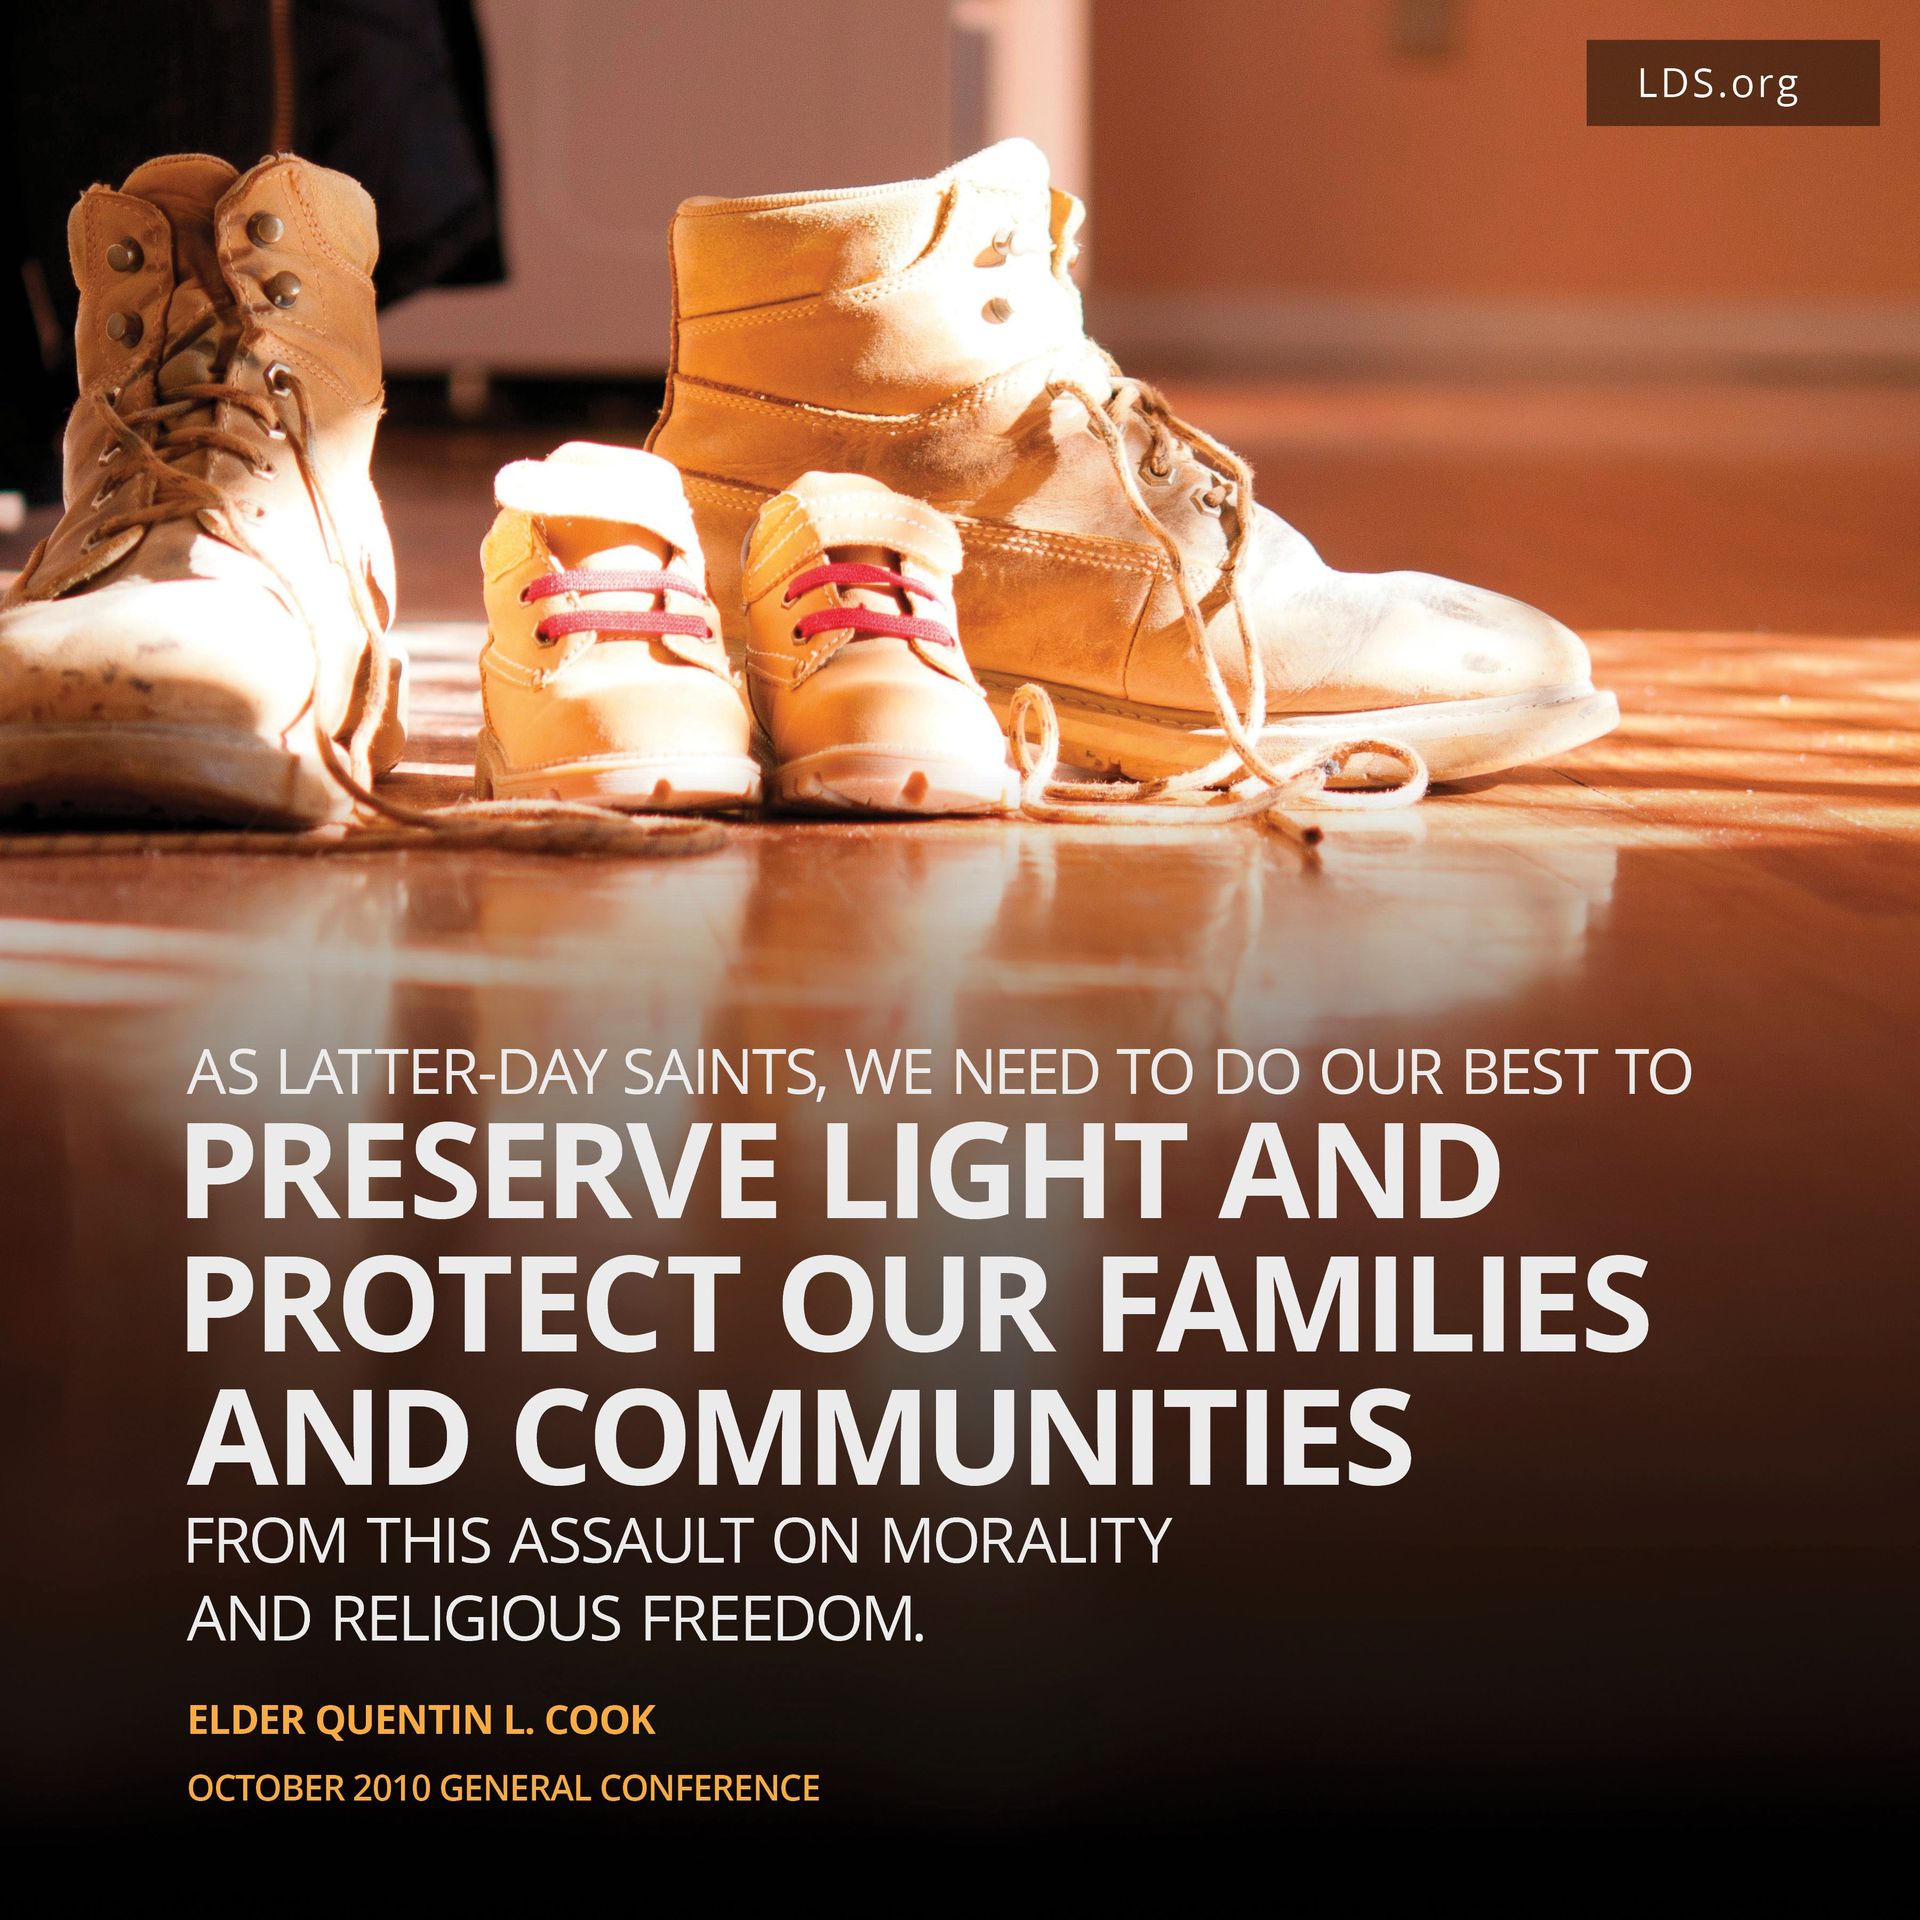 “As Latter-day Saints, we need to do our best to preserve light and protect our families and communities from this assault on morality and religious freedom.”—Elder Quentin L. Cook, October 2010 general conference